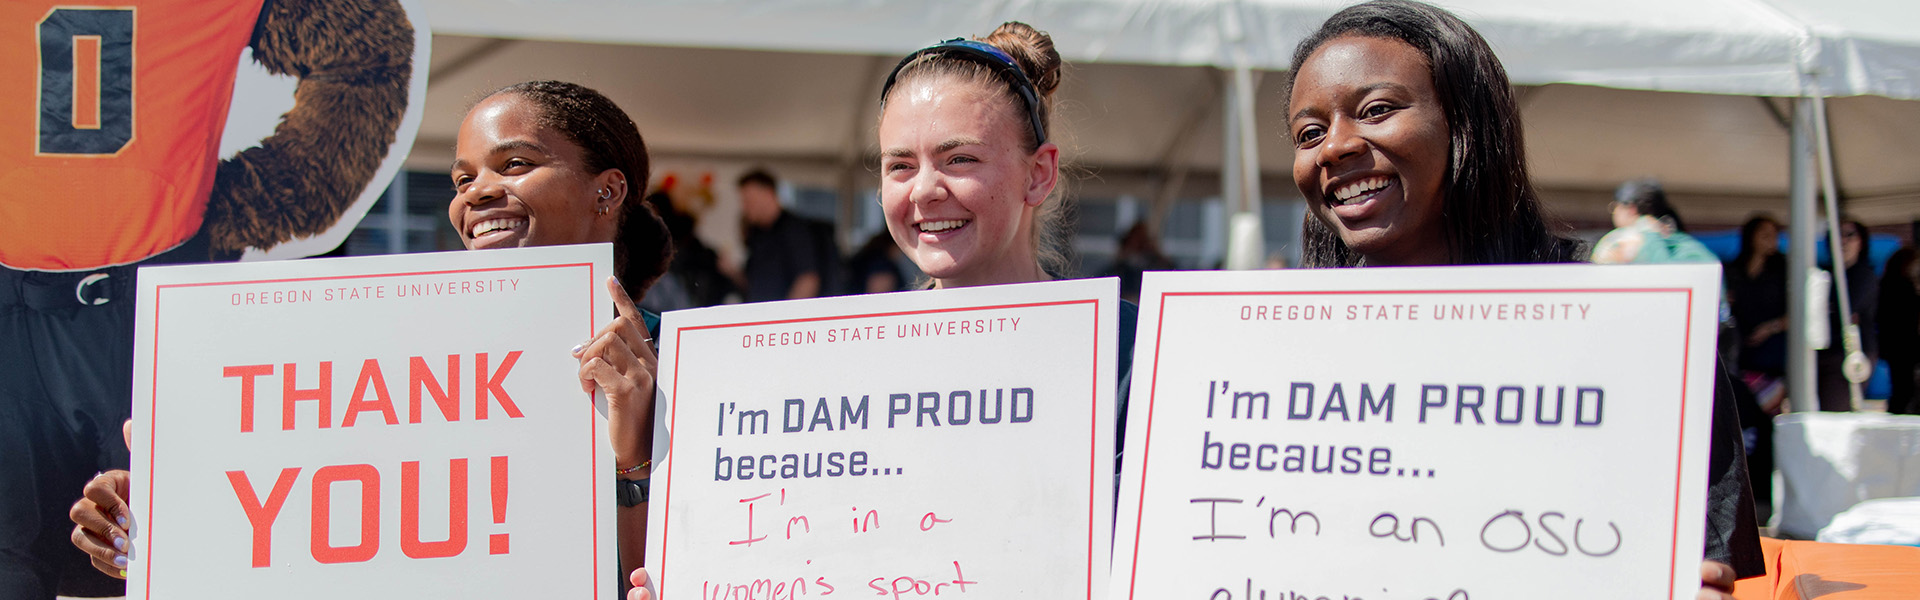 Three students holding signs that say "Thank You" and "I'm Dam Proud because..."